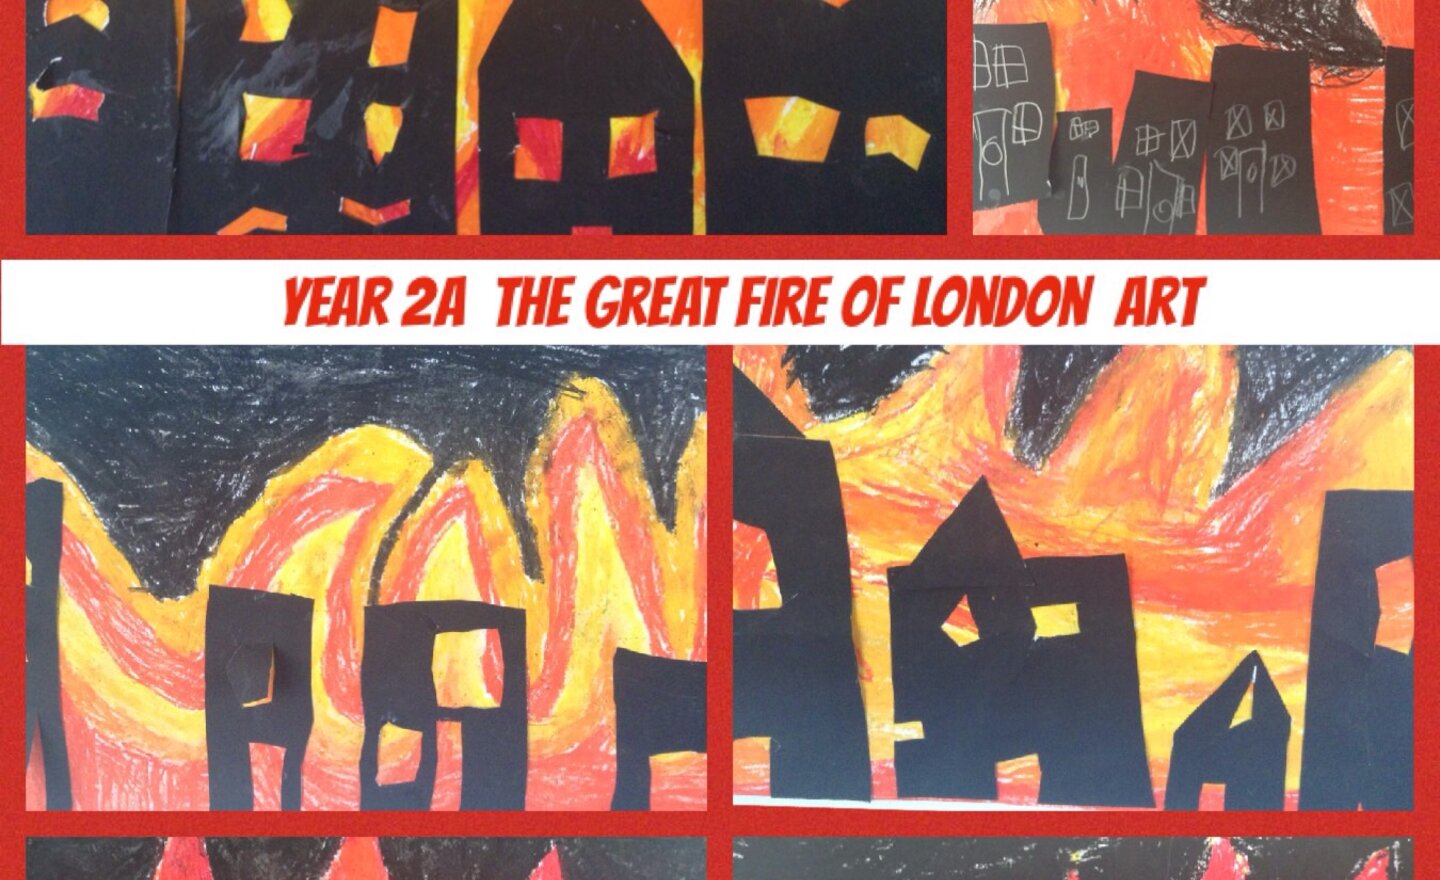 Image of The Great Fire of London Art